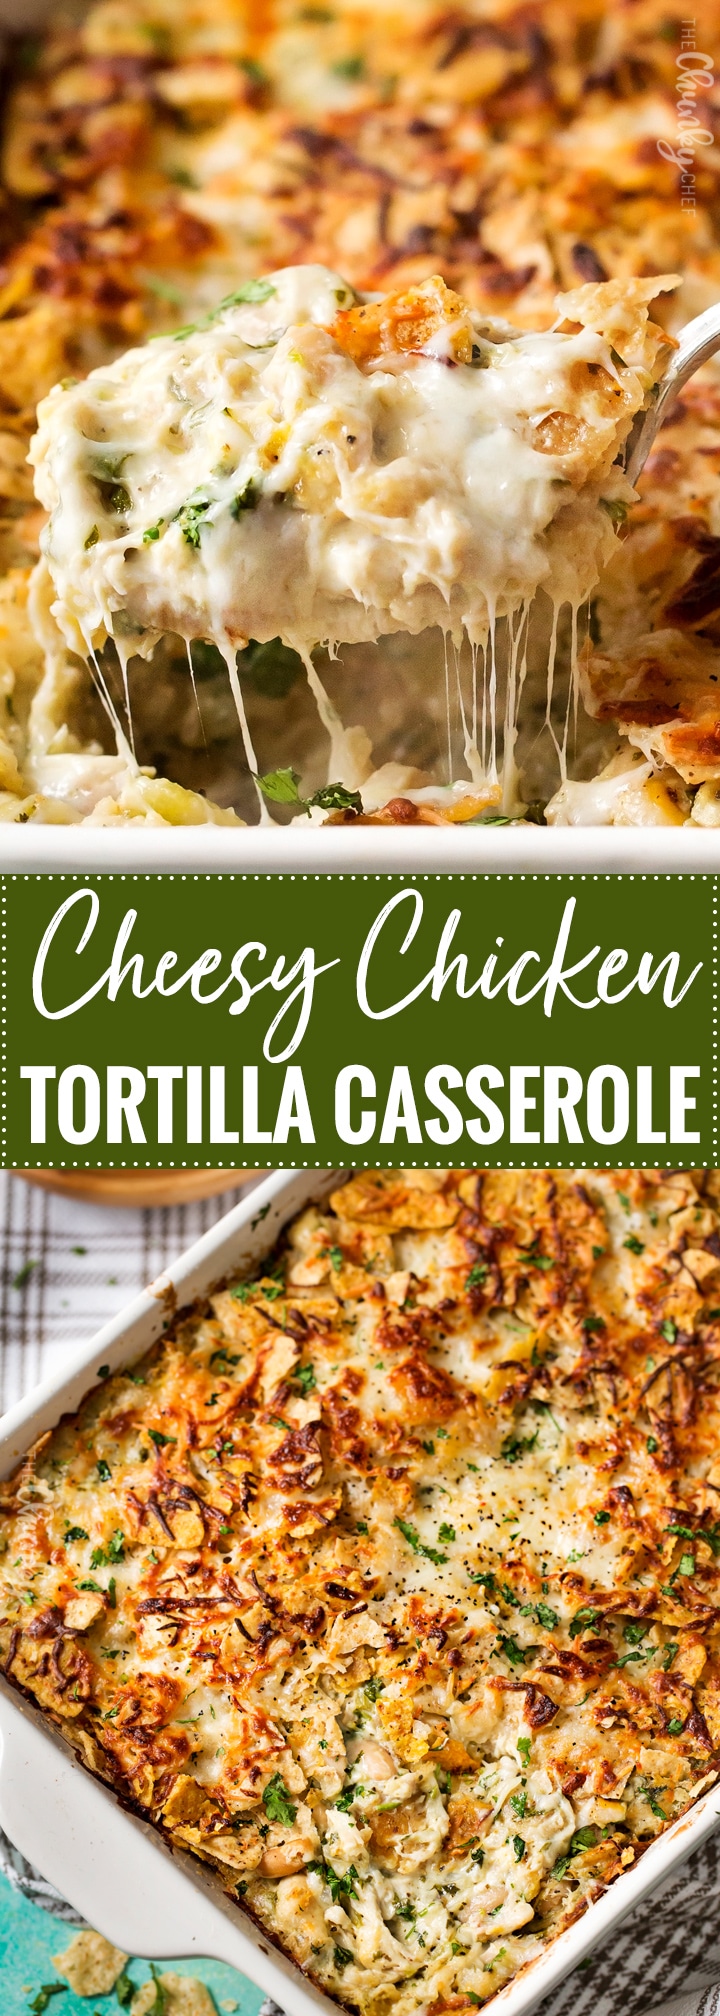 Cheesy Chicken Tortilla Casserole | A rotisserie chicken, creamy salsa verde sauce, plenty of gooey cheese and crunchy tortilla chips... it's the perfect casserole that's easy to prep ahead for a weeknight dinner! | http://thechunkychef.com